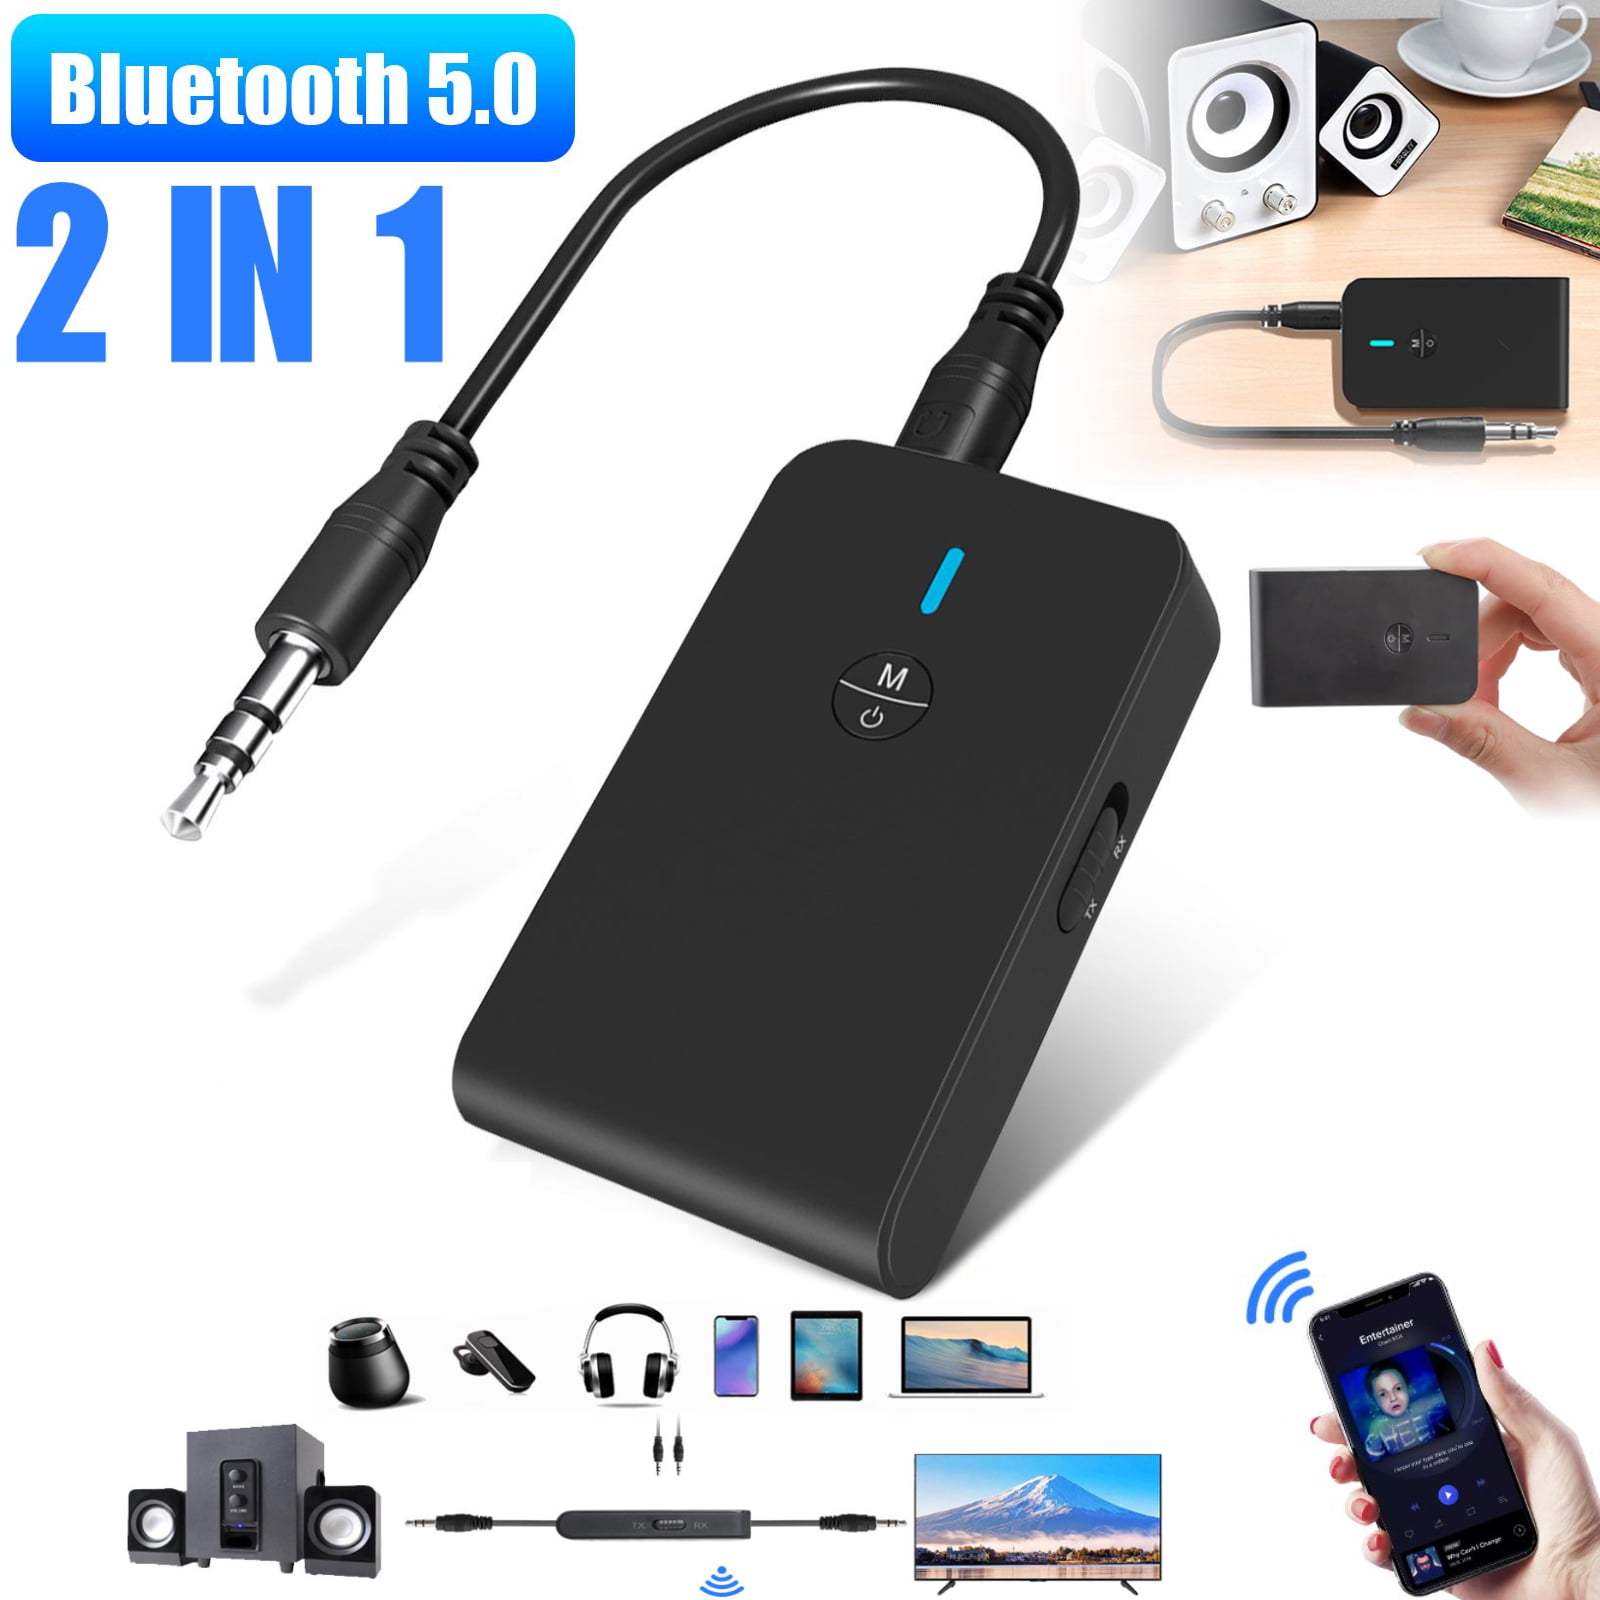 2 in 1 Bluetooth 5.0 Transmitter and Receiver 3.5mm AUX Wireless Audio Adapter 